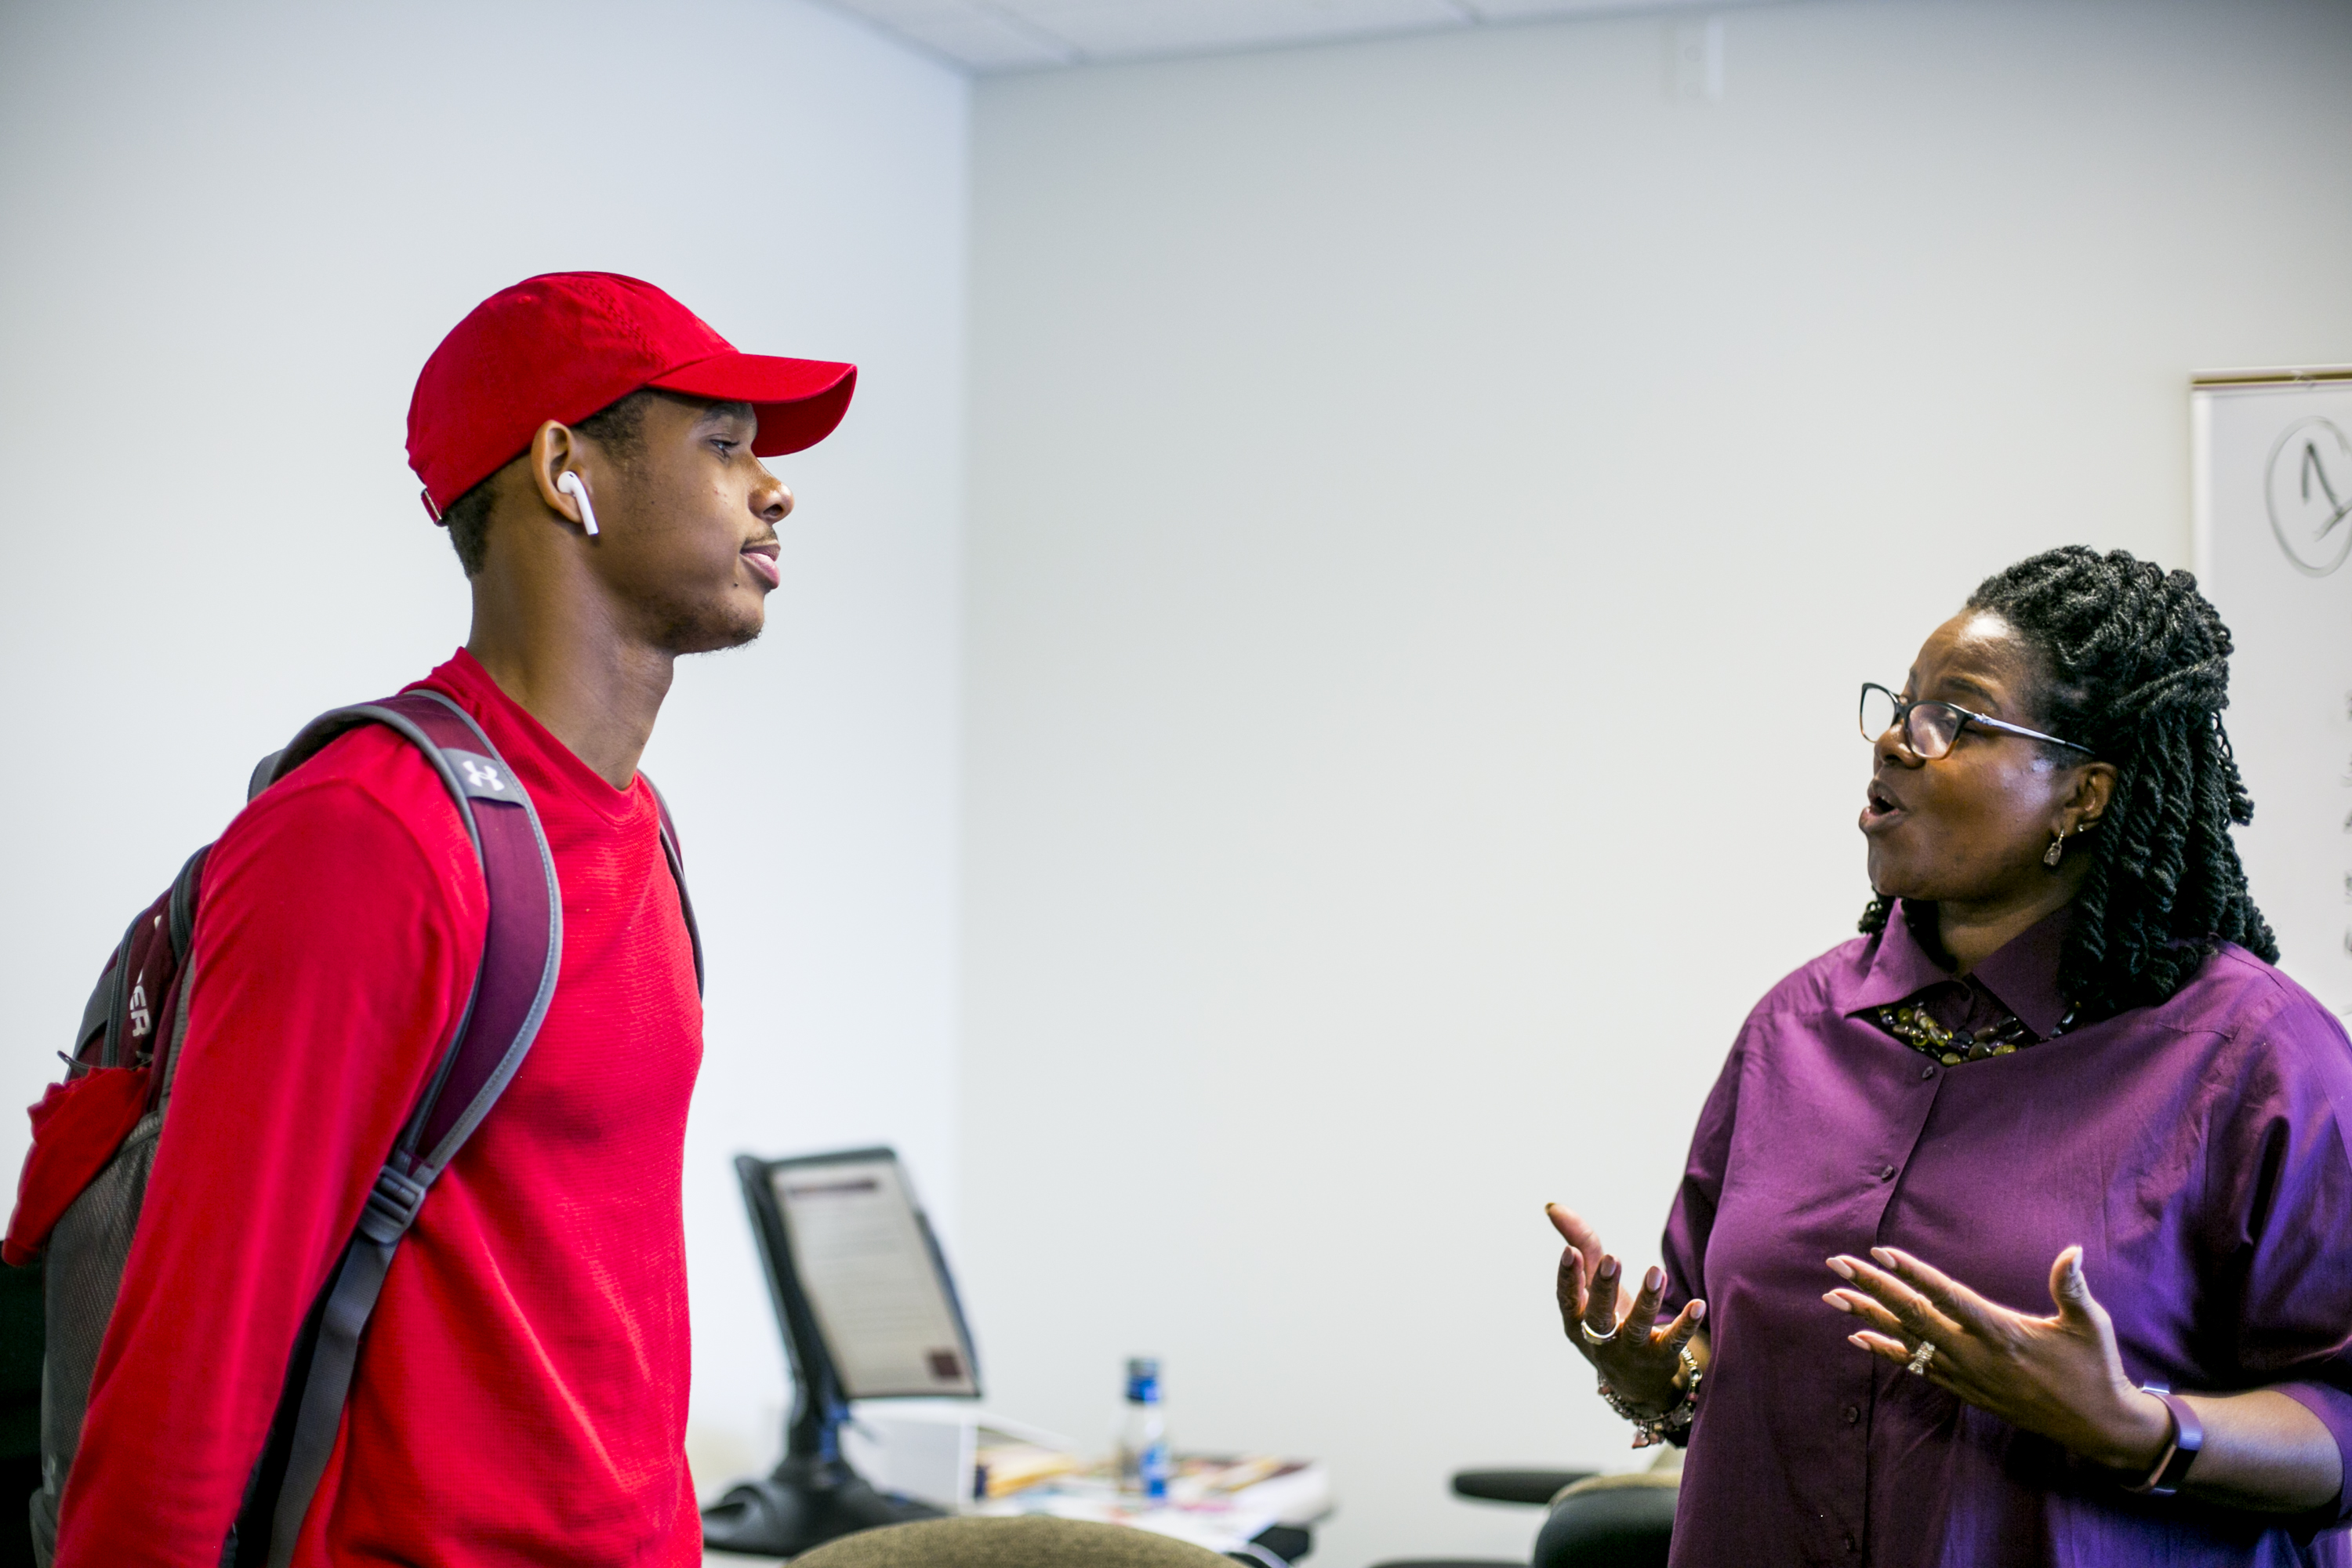 Demetrius Robinson, a freshman at Central Michigan University from Detroit, chats with Mary Henley, who heads a program that helps first generation and low income students succeed on campus.